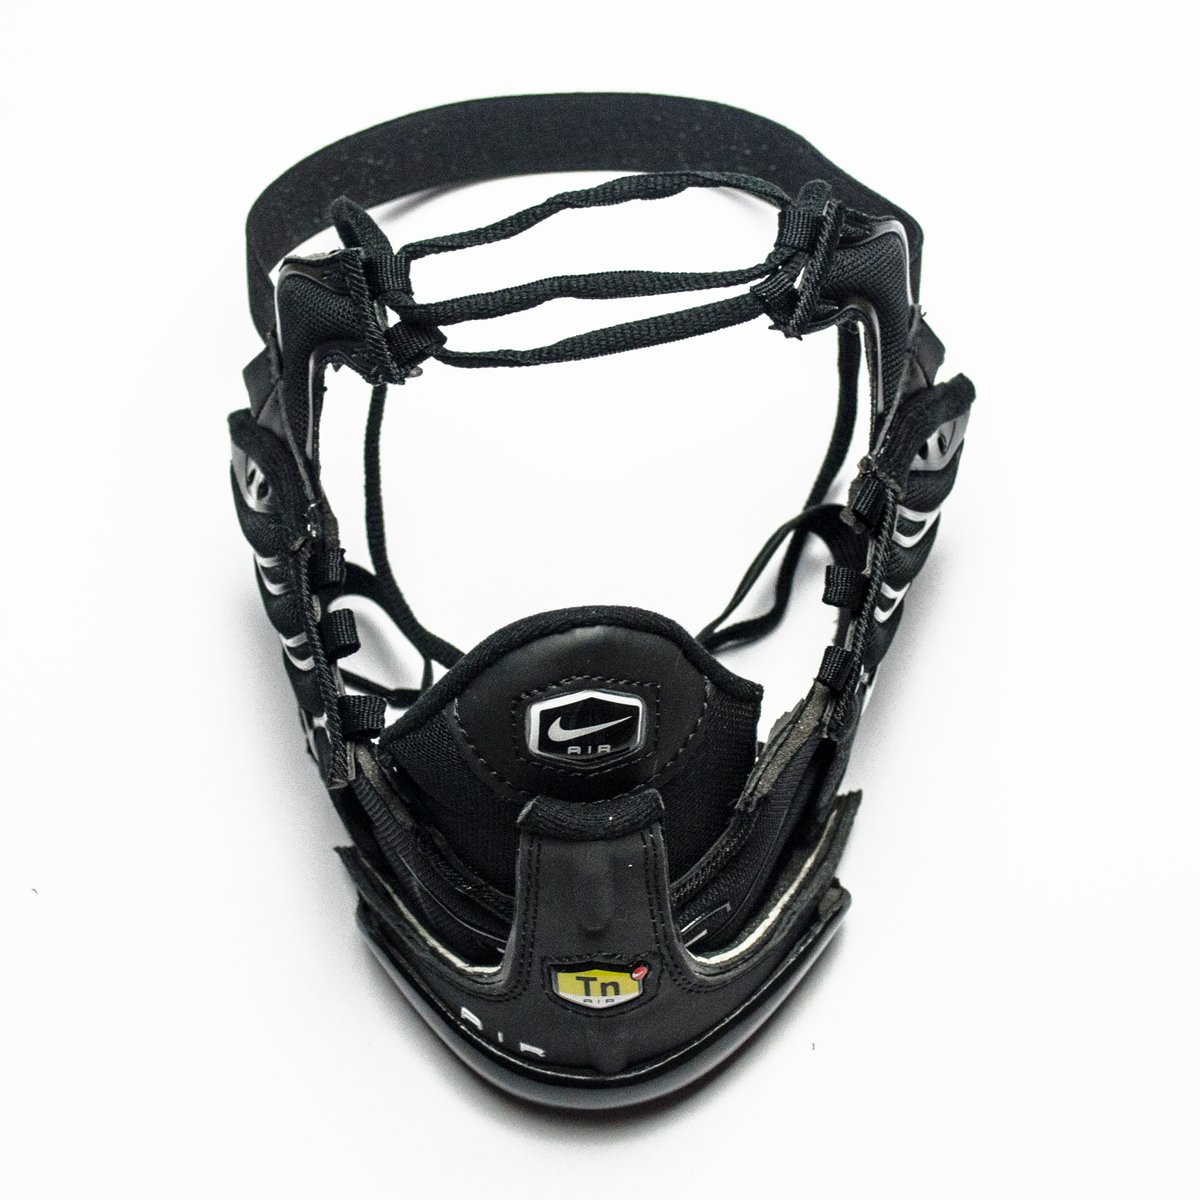 Image of SNEAKER MASK / REFLECTIVE BLACK / HEAD PIECE